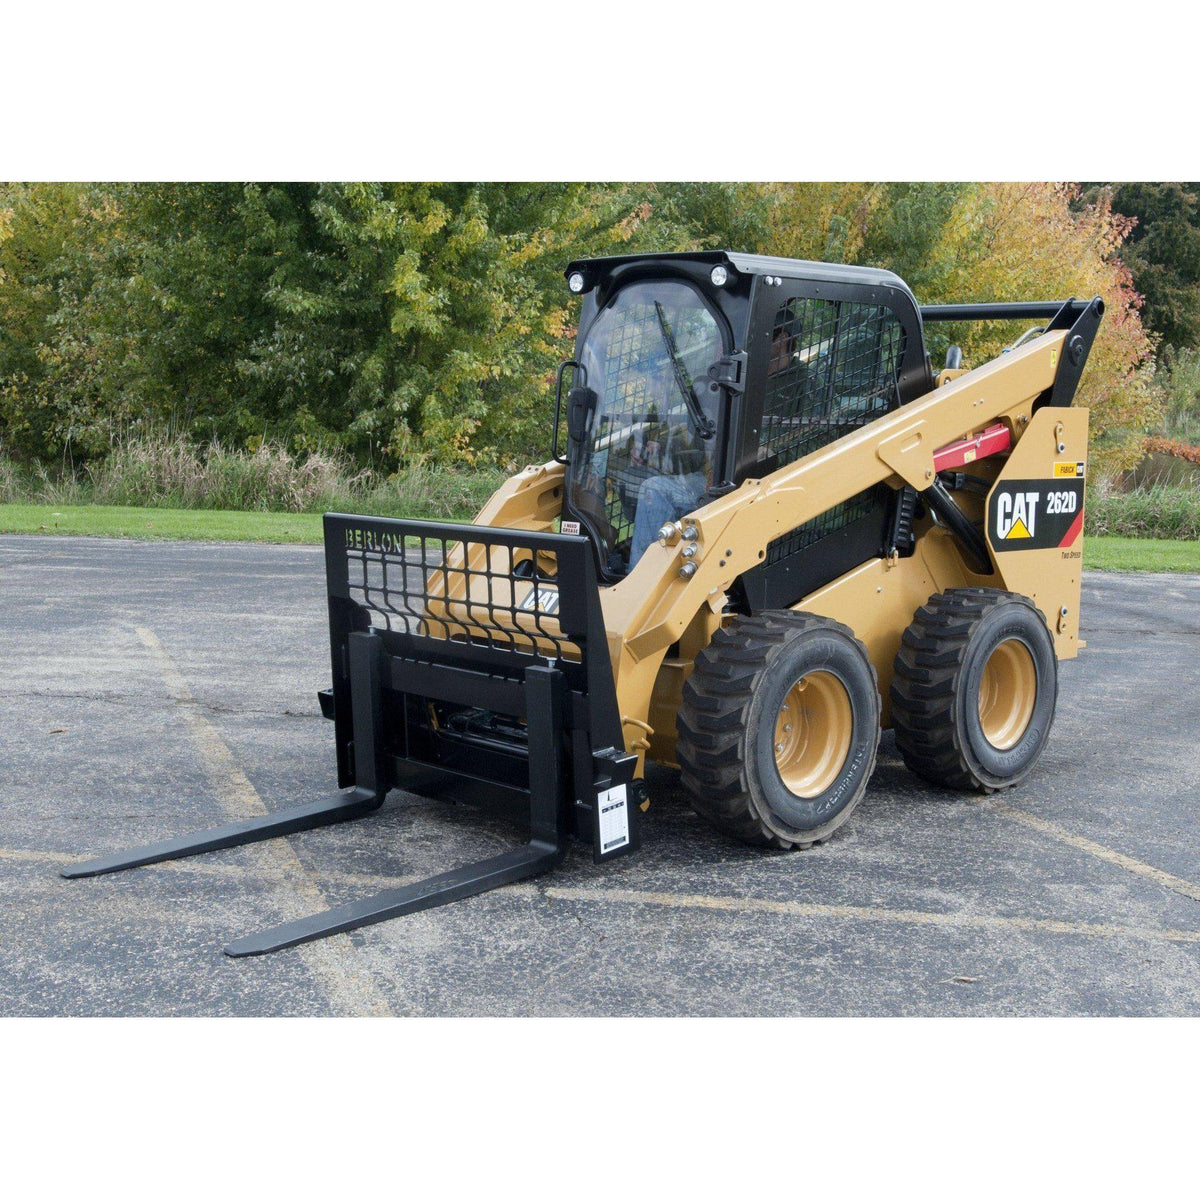 cat skid steer ready to action with the berlon class 2 pallet fork